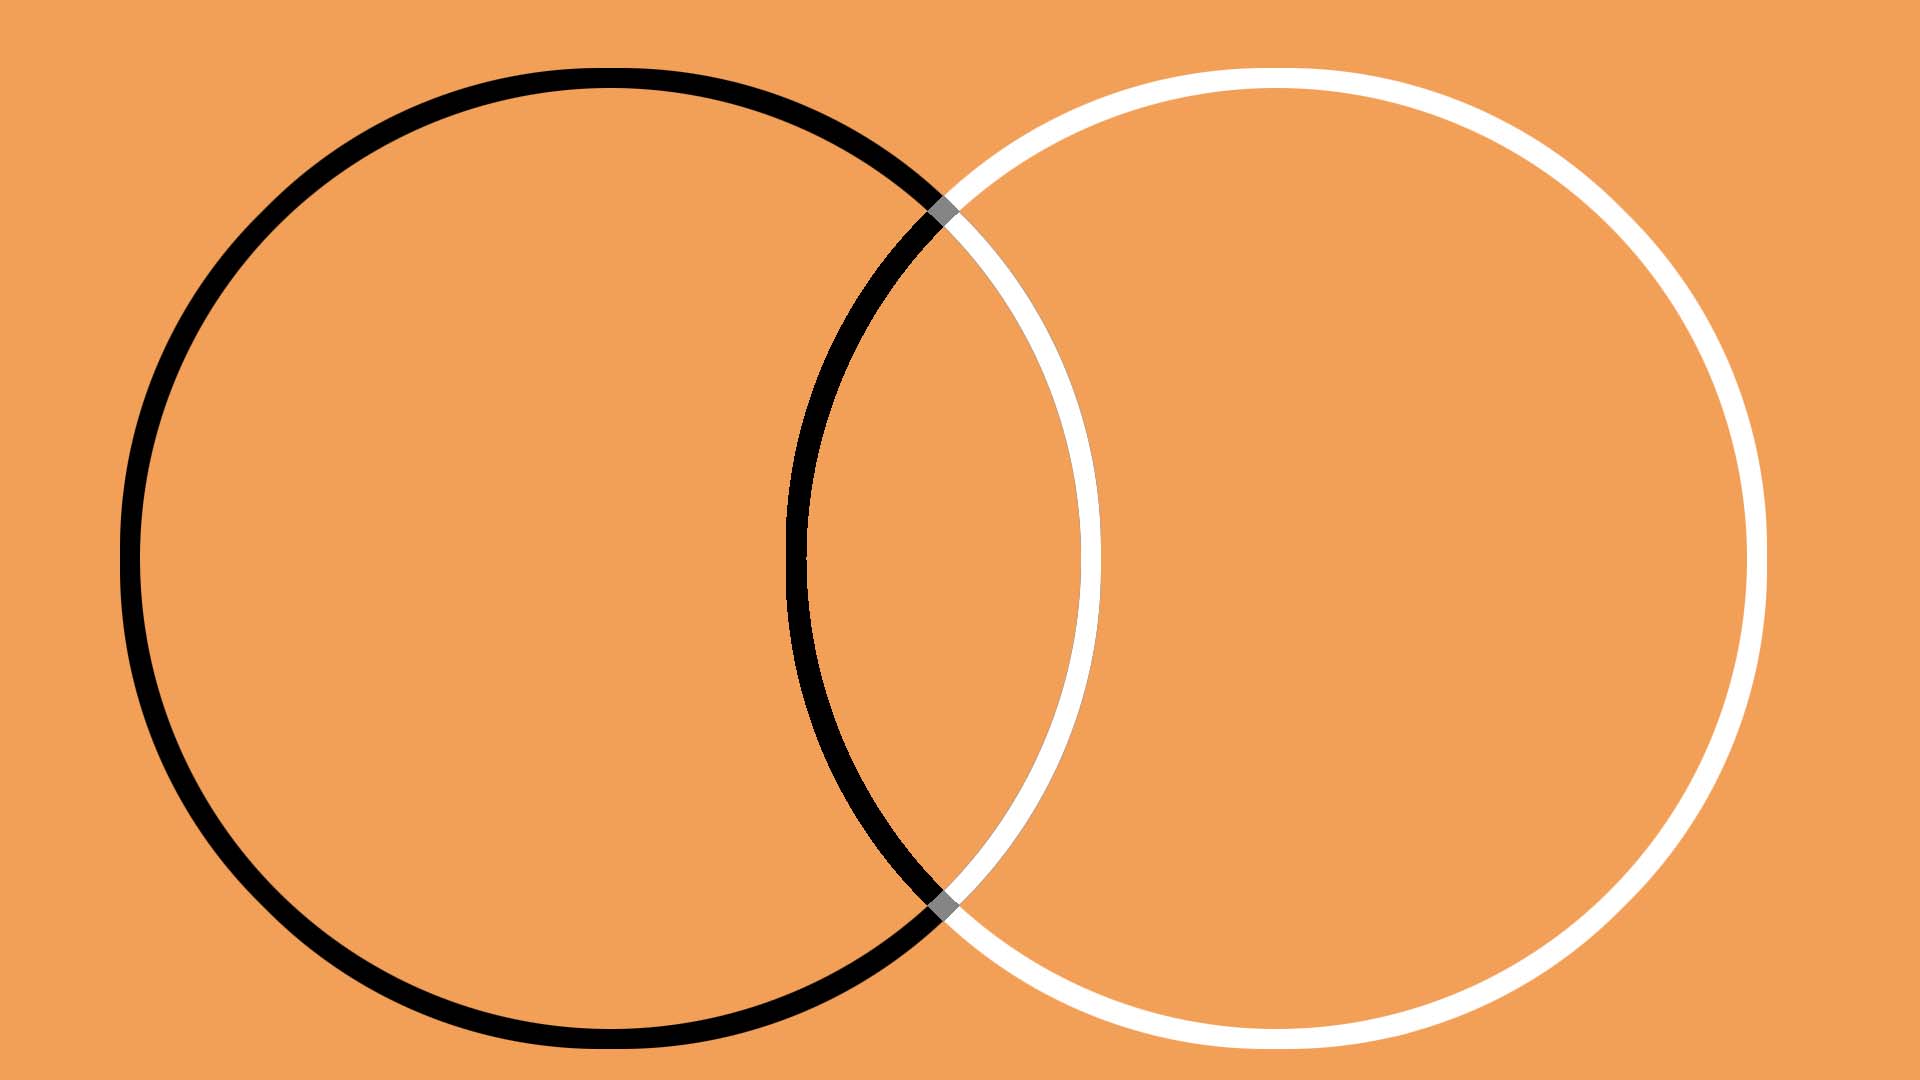 Two circles intersect showing balance